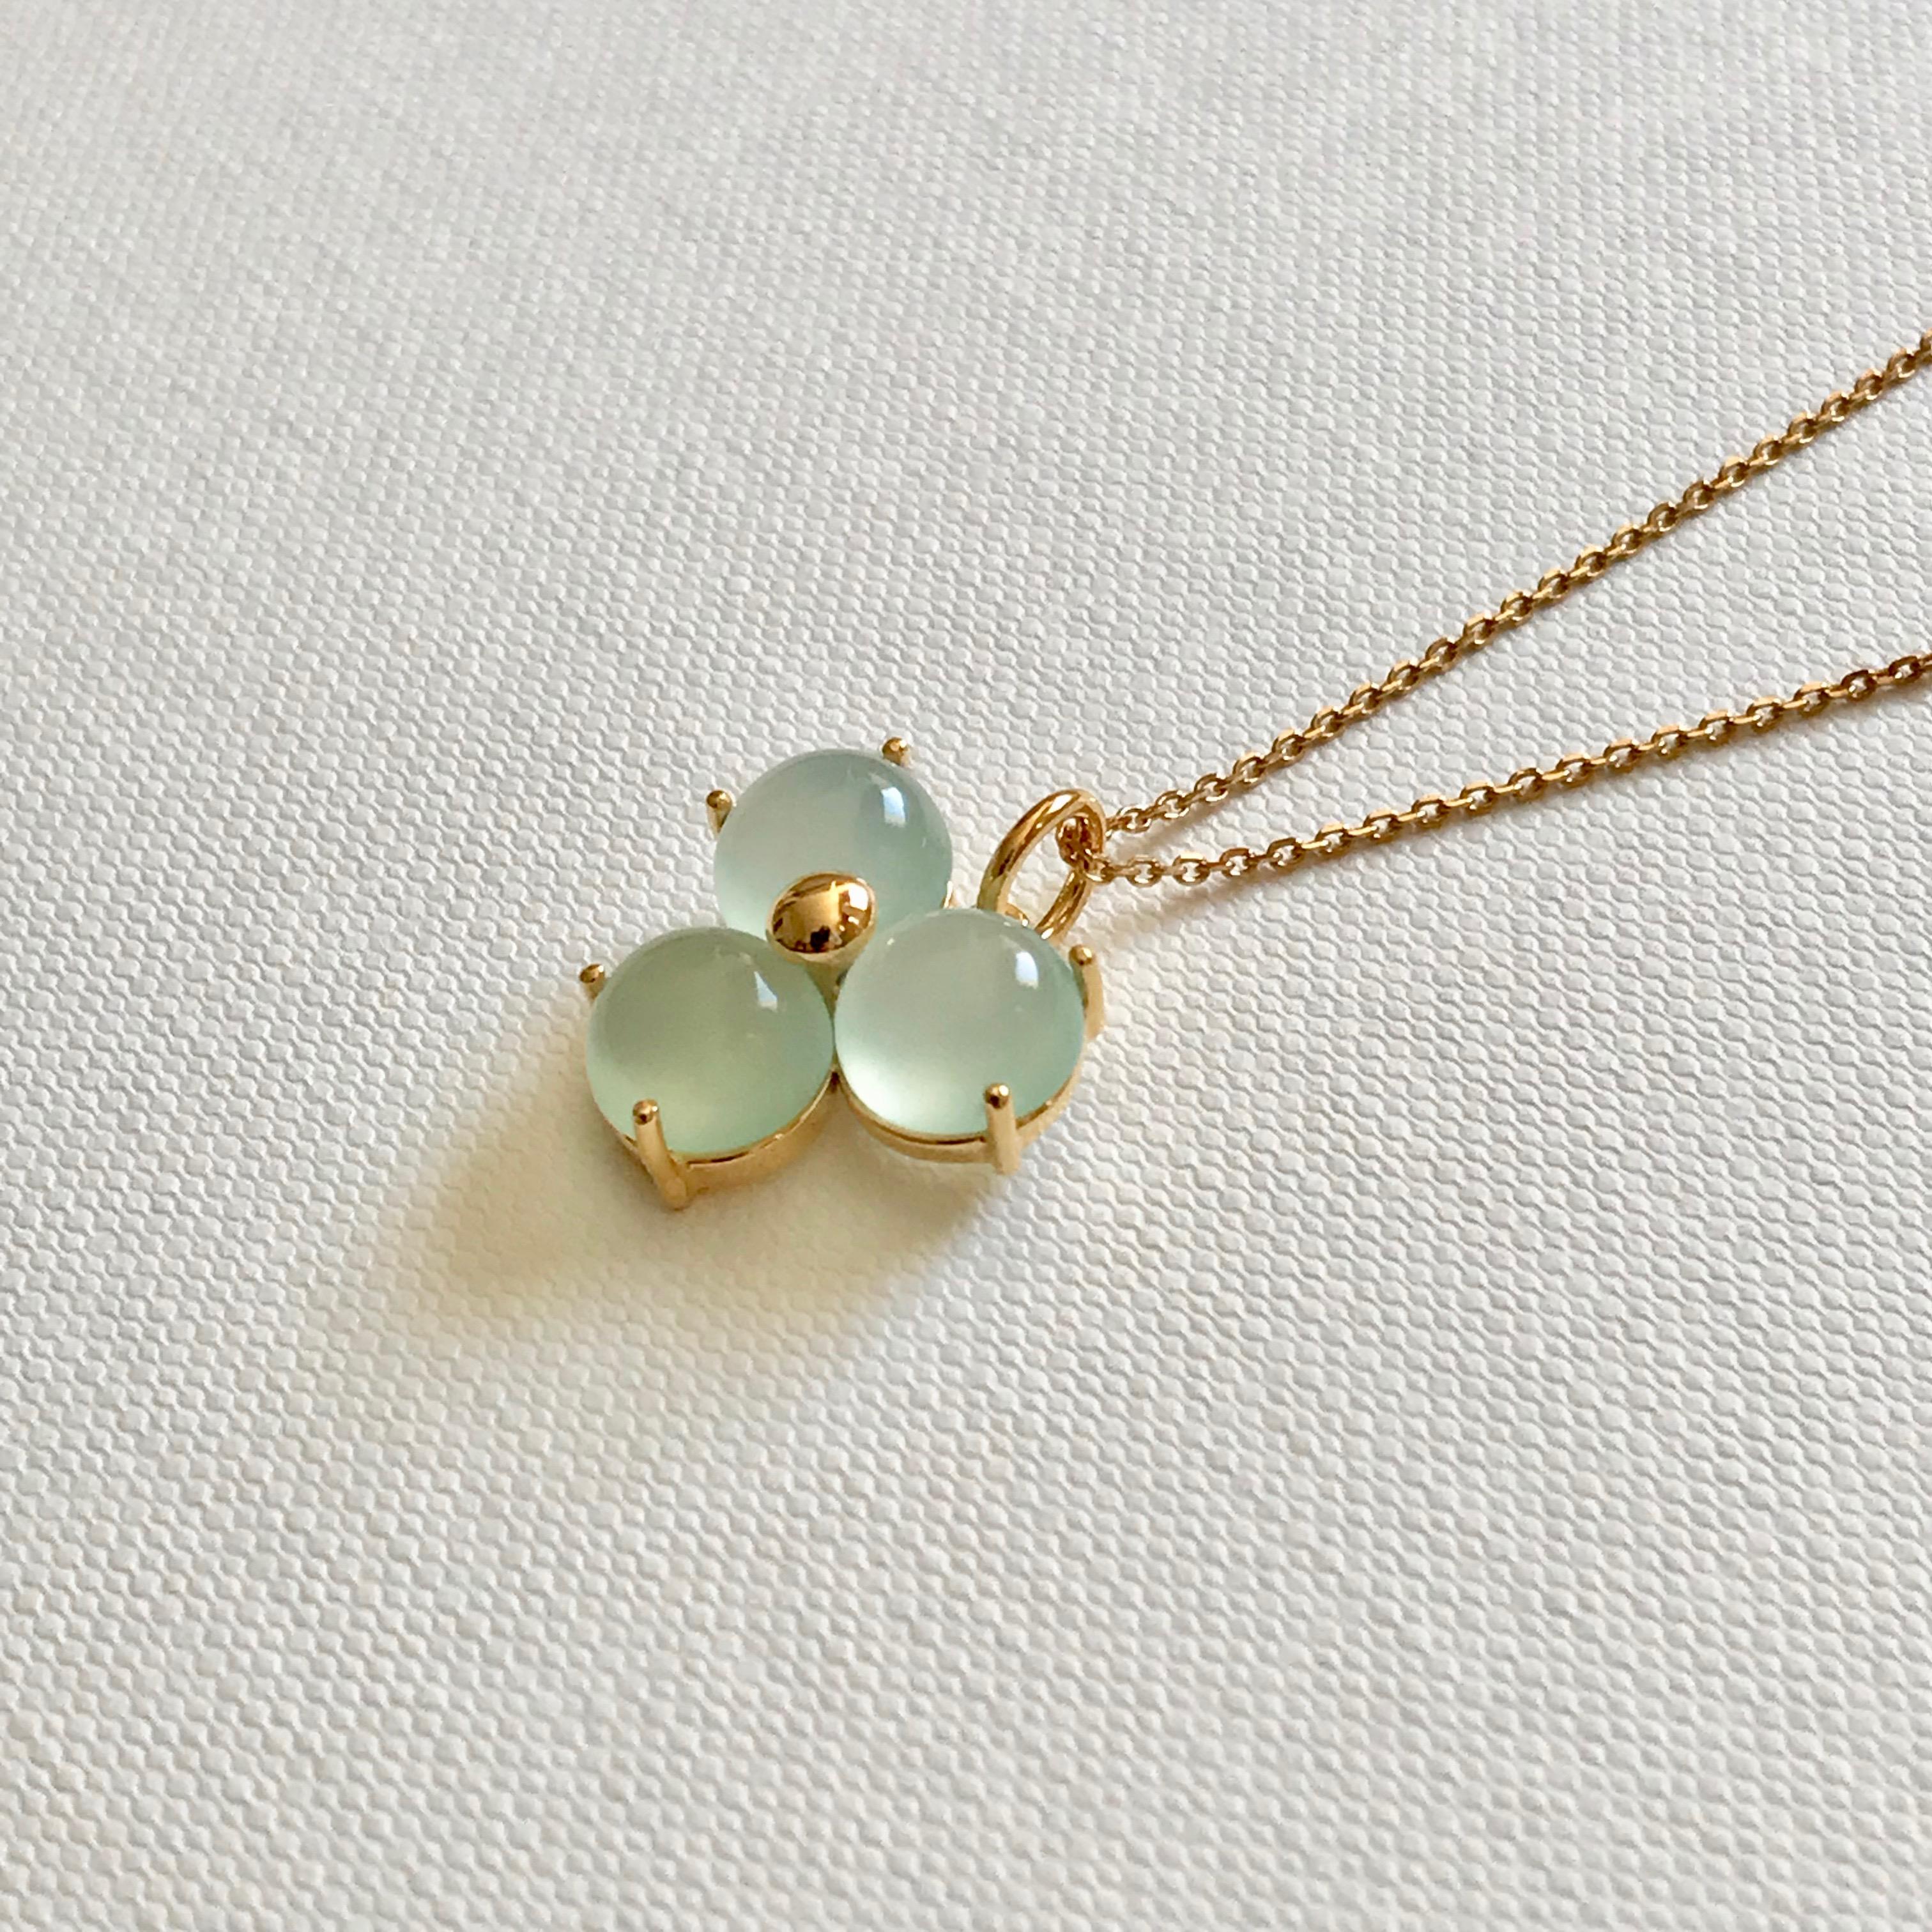 Contemporary 18 Karat Yellow Gold Blue Blossom Pendant Chain Necklace